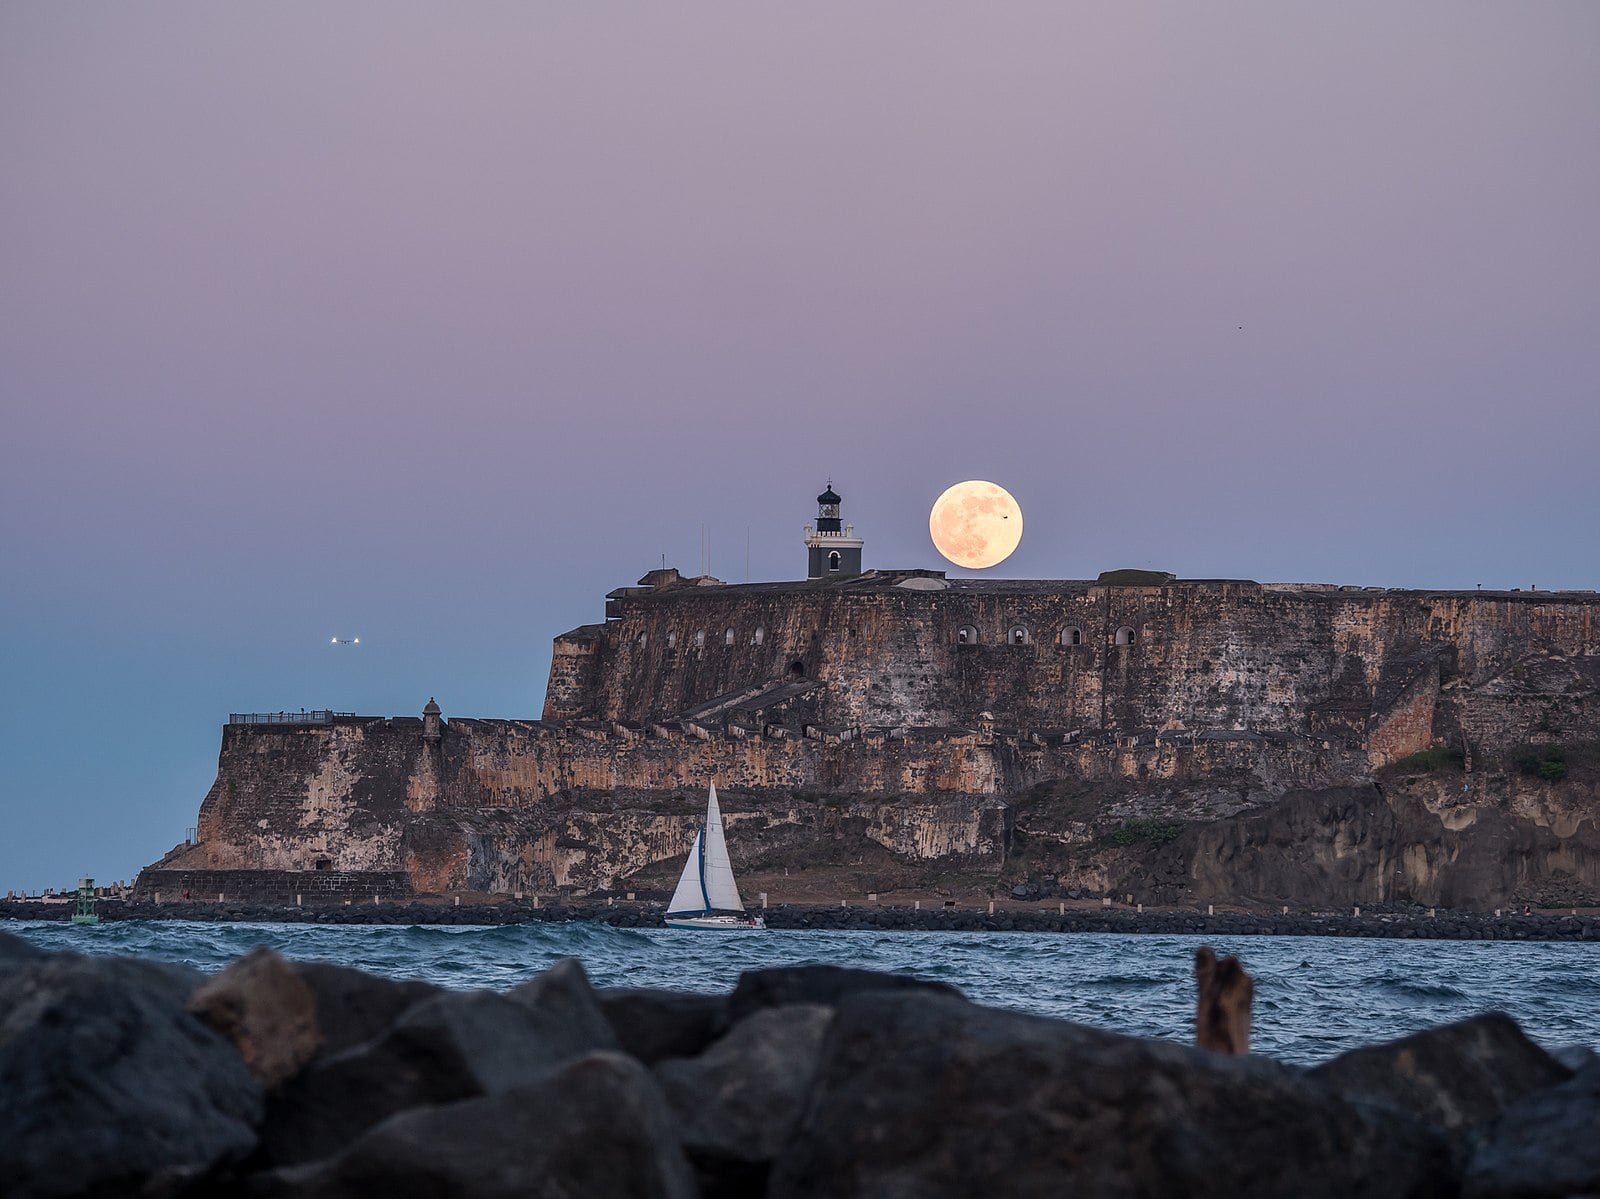 Castillo San Felipe del Morro is one of the places to go for activities in Puerto Rico